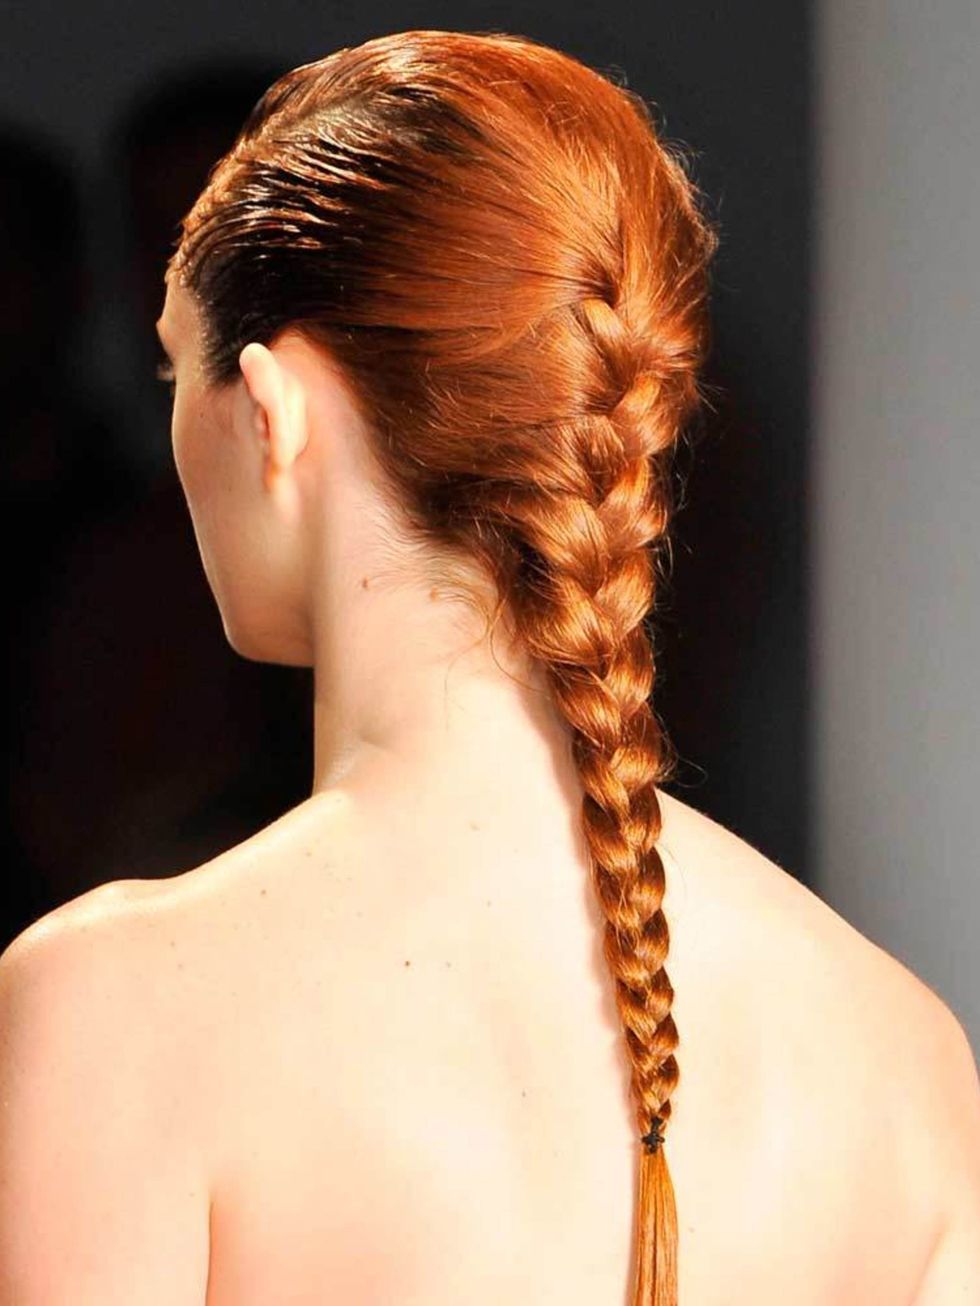 <p>Peter Som</p>

<p>The look: Elegant braids</p>

<p>Hairstylist: Eugene Souleiman</p>

<p>Key product: Plenty of <a href="http://www.wella.com/professional/en-EN/home" target="_blank">Wella Professionals</a> Mousse</p>

<p>Top tip: Use three egg-sized d